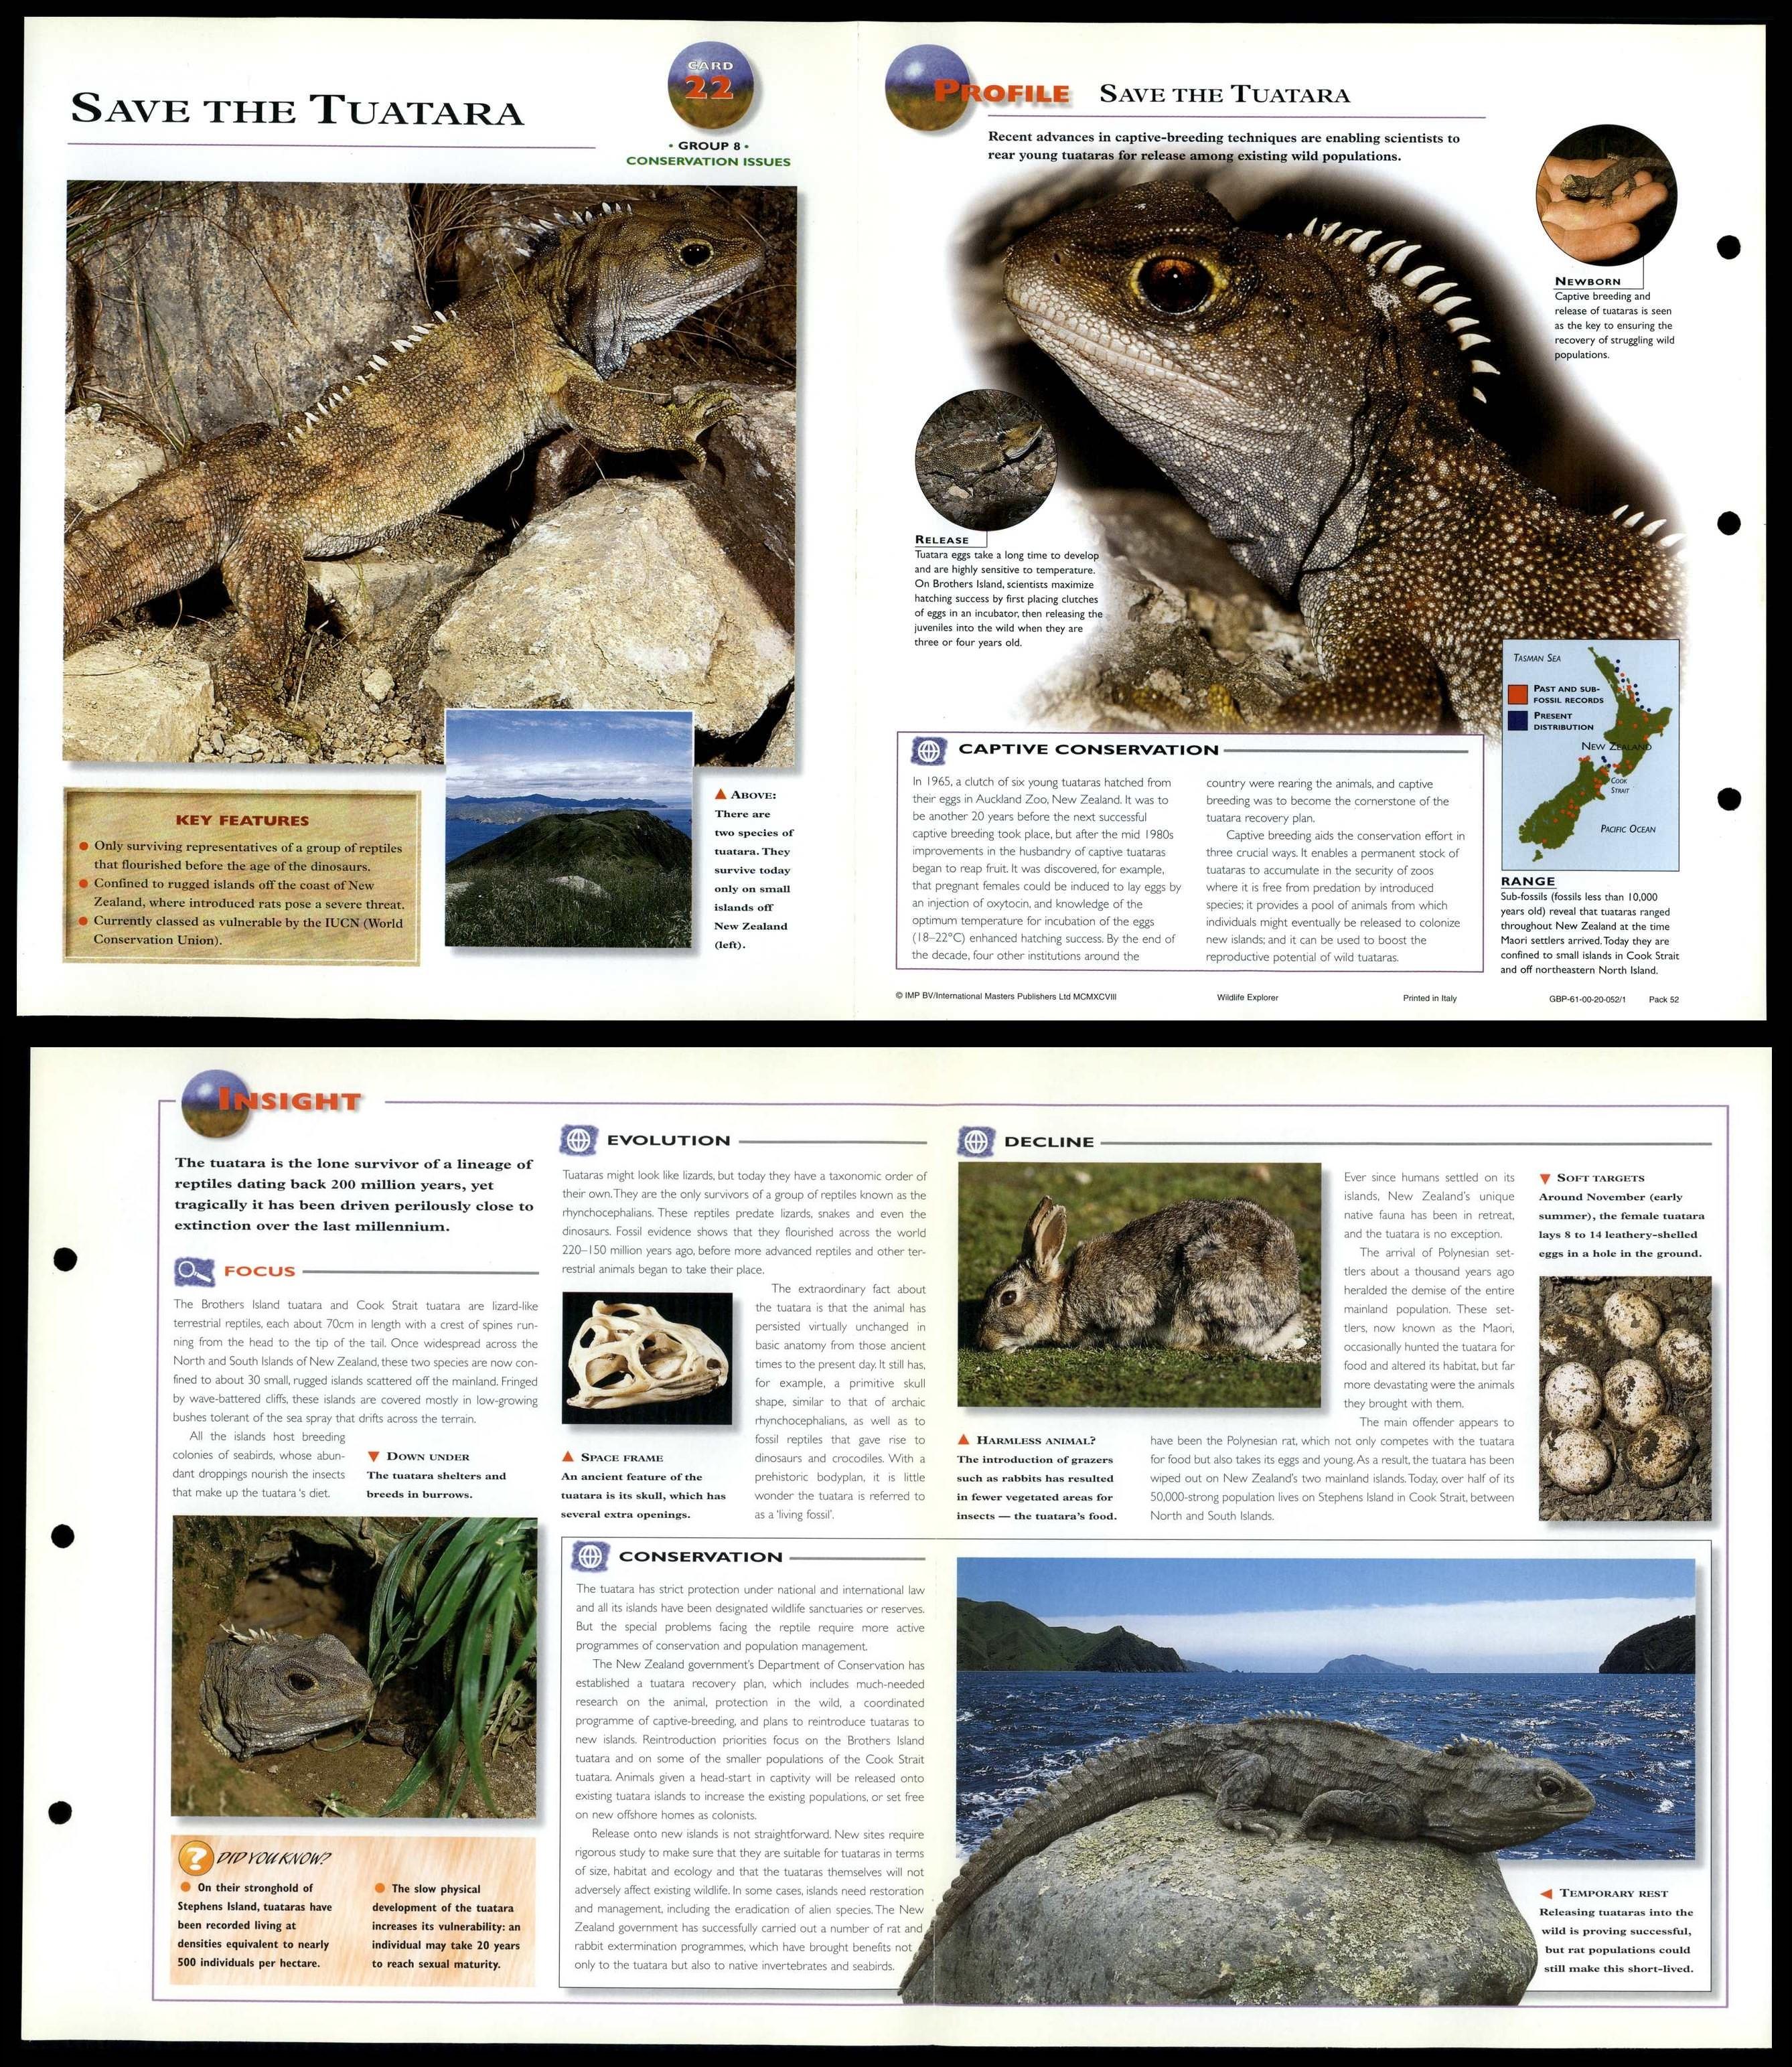 Save The Tuatara #22 Conservation - Wildlife Explorer Fold-Out Card